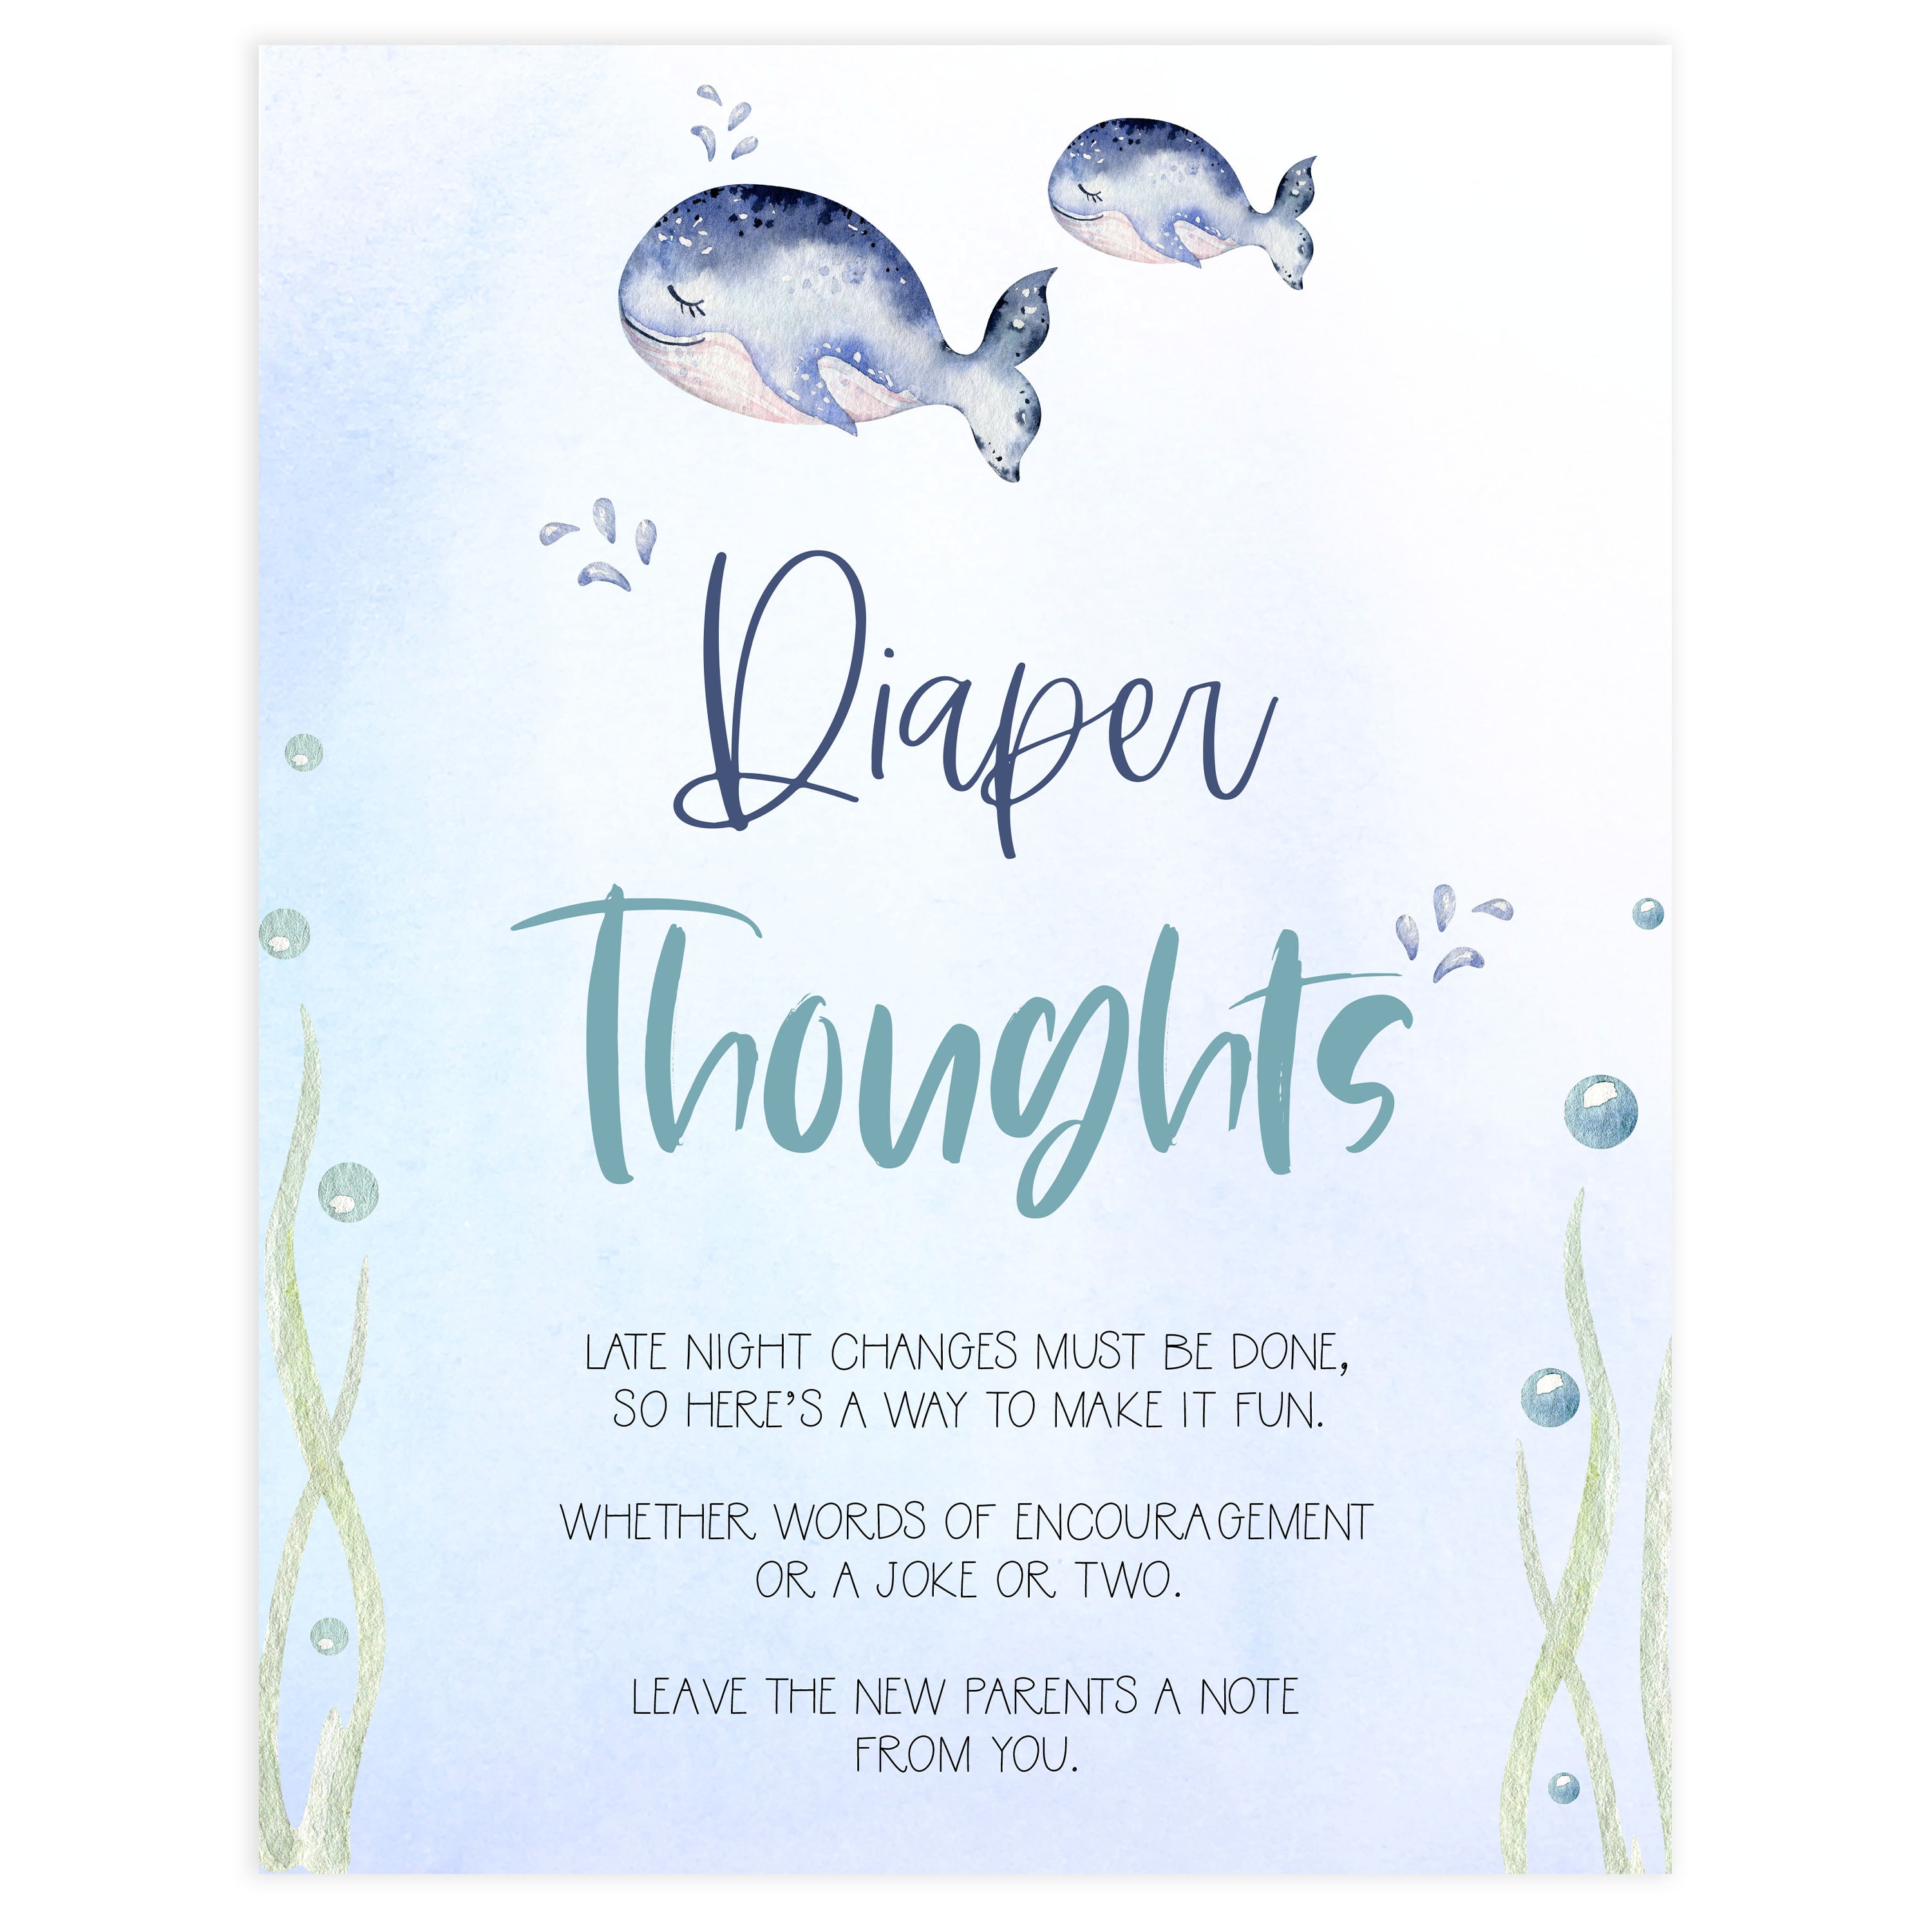 diaper thoughts baby game, late night diapers, Printable baby shower games, whale baby games, baby shower games, fun baby shower ideas, top baby shower ideas, whale baby shower, baby shower games, fun whale baby shower ideas